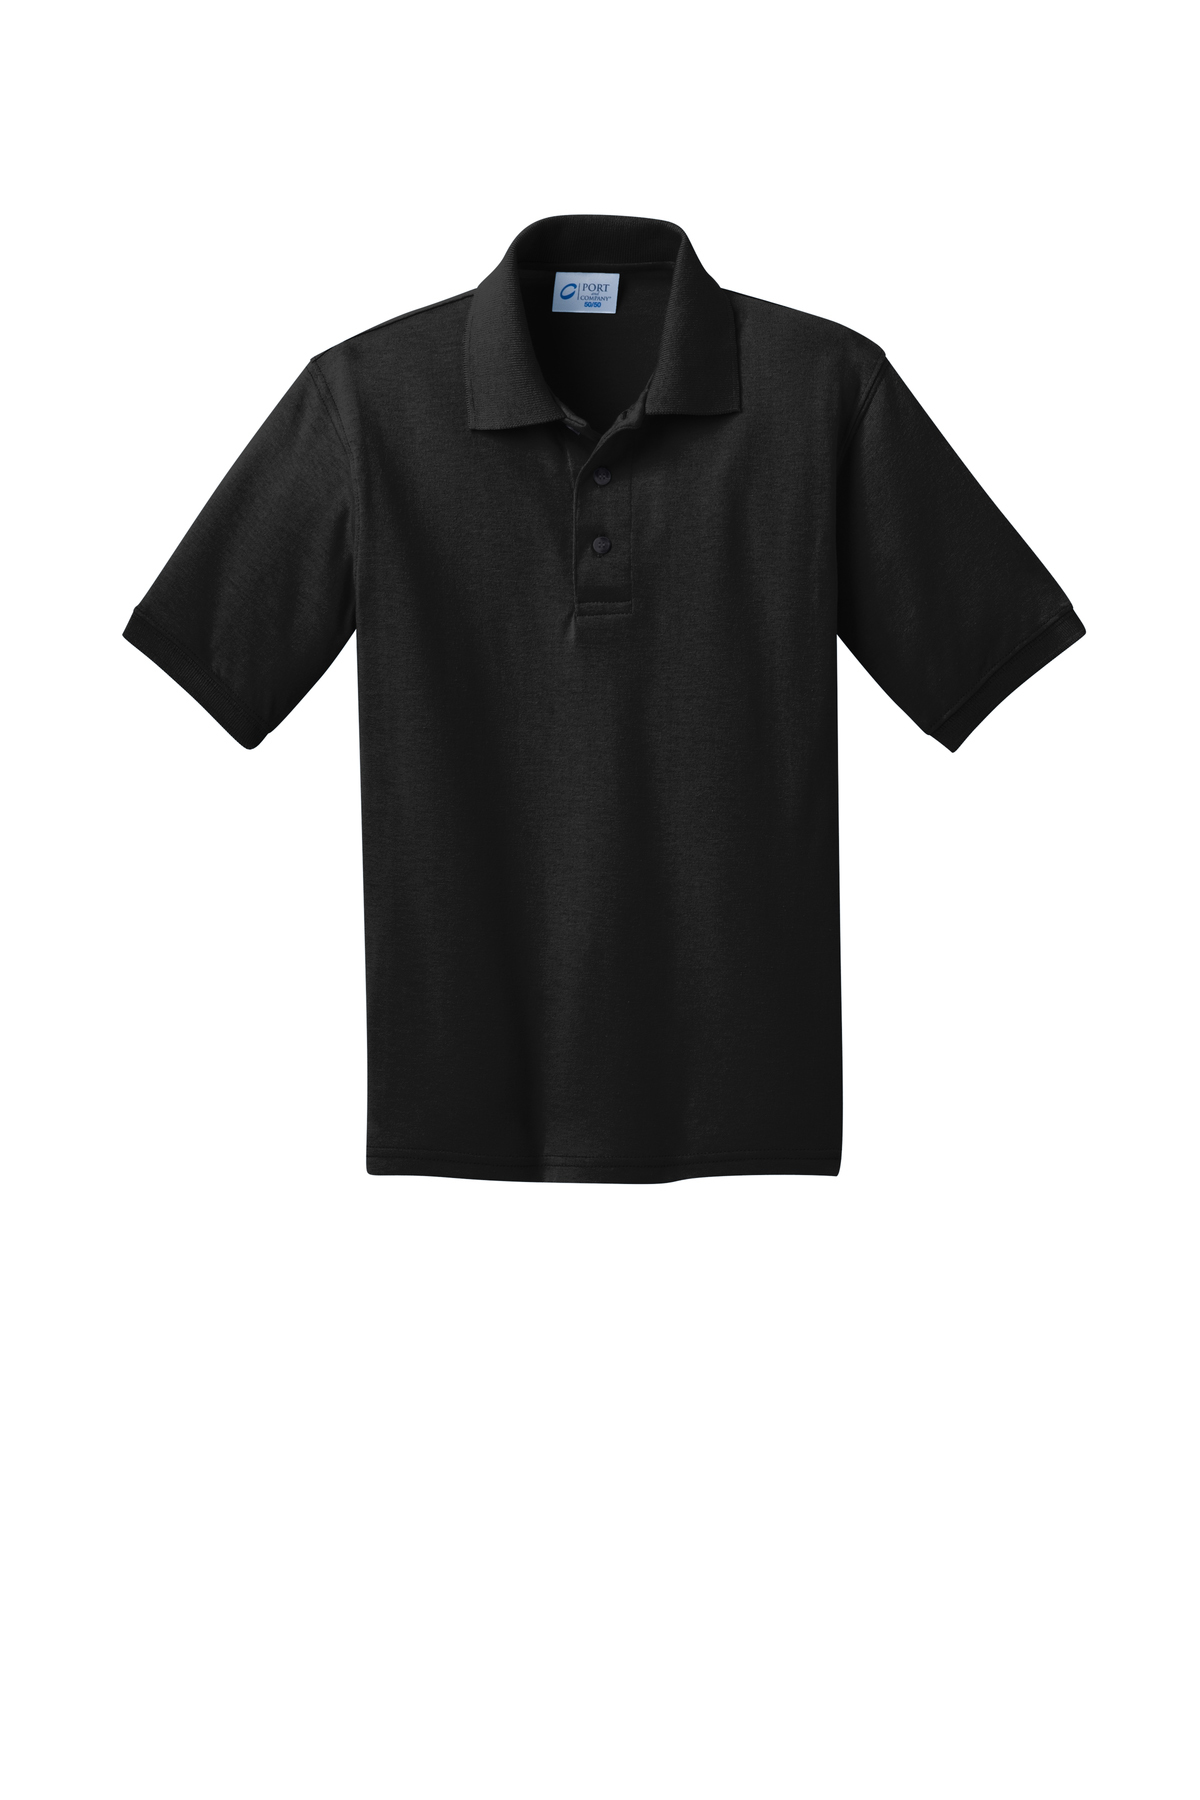 Port & Company Youth Core Blend Jersey Knit Polo | Product | SanMar